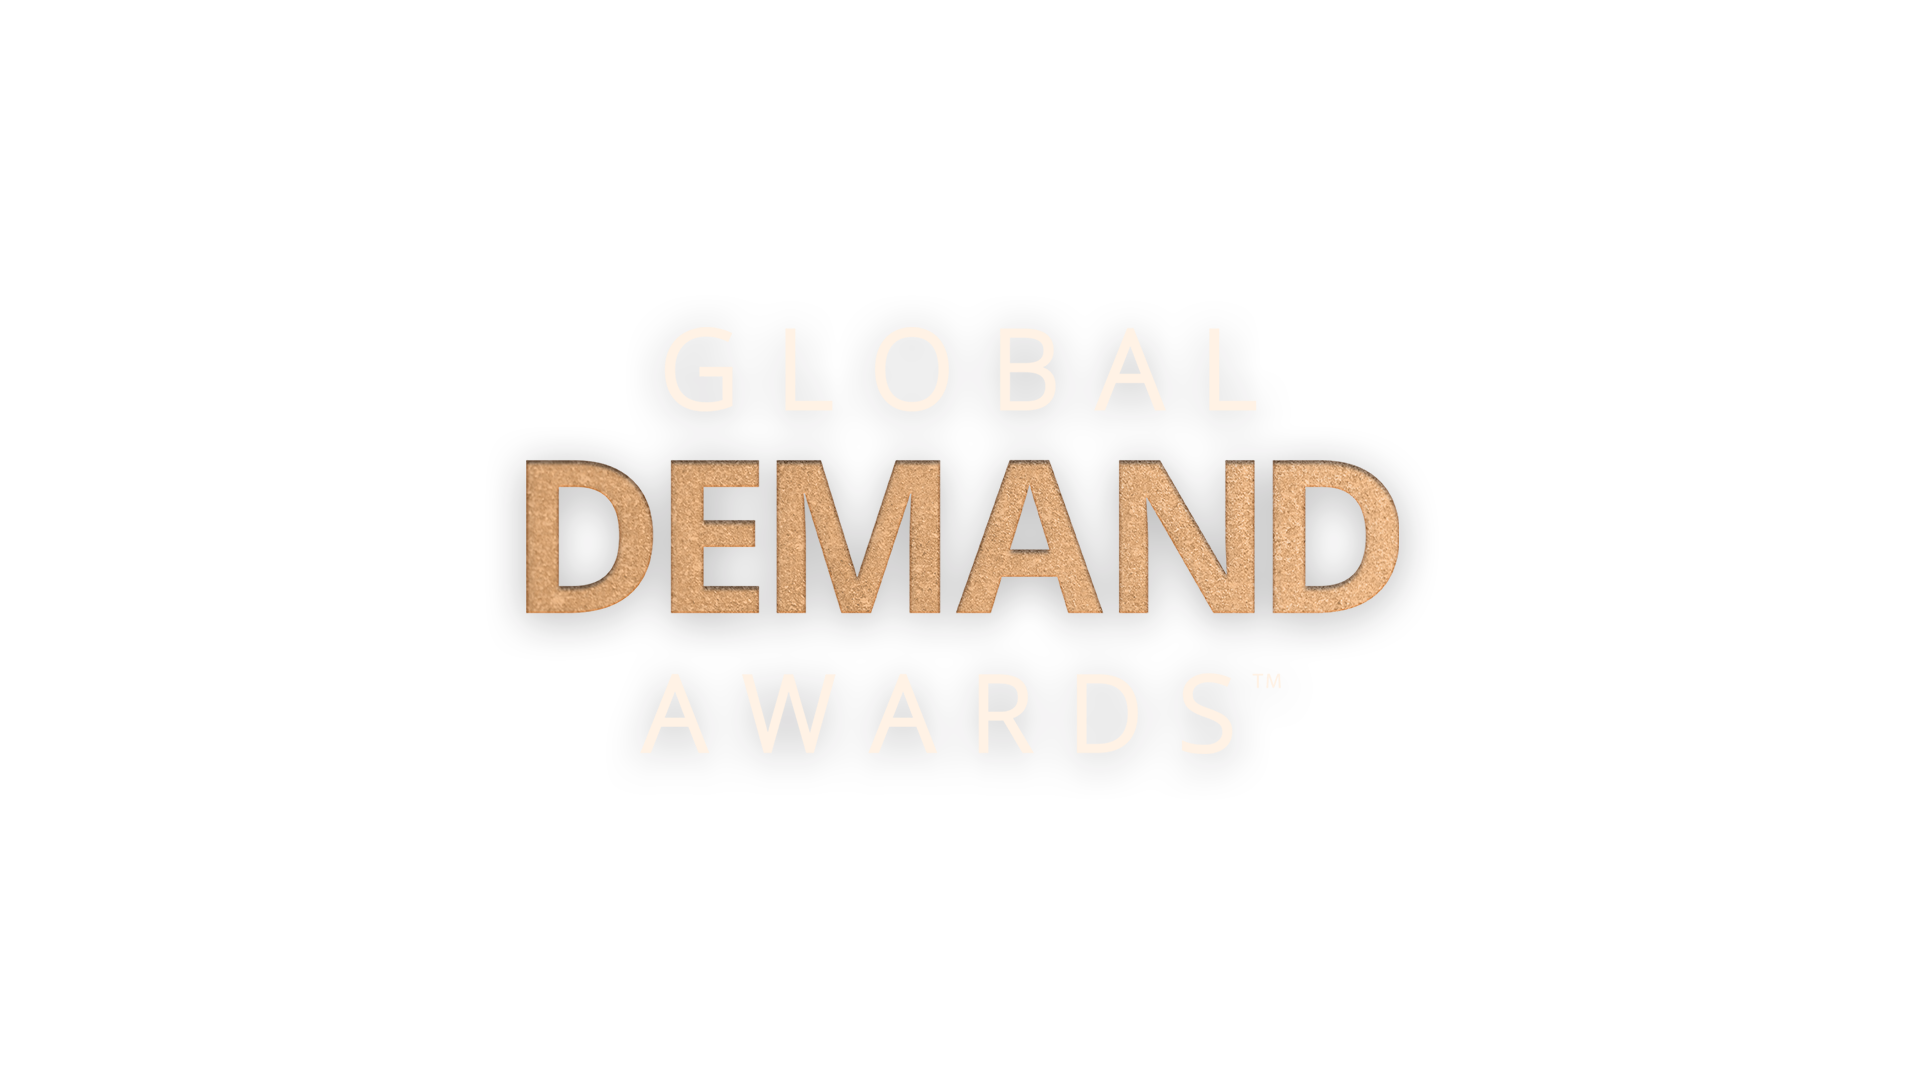 Stranger Things - WINNER: World's Choice, TV: Most In-Demand TV Show and  Most In-Demand Drama Series of 2022 - The Global Demand Awards